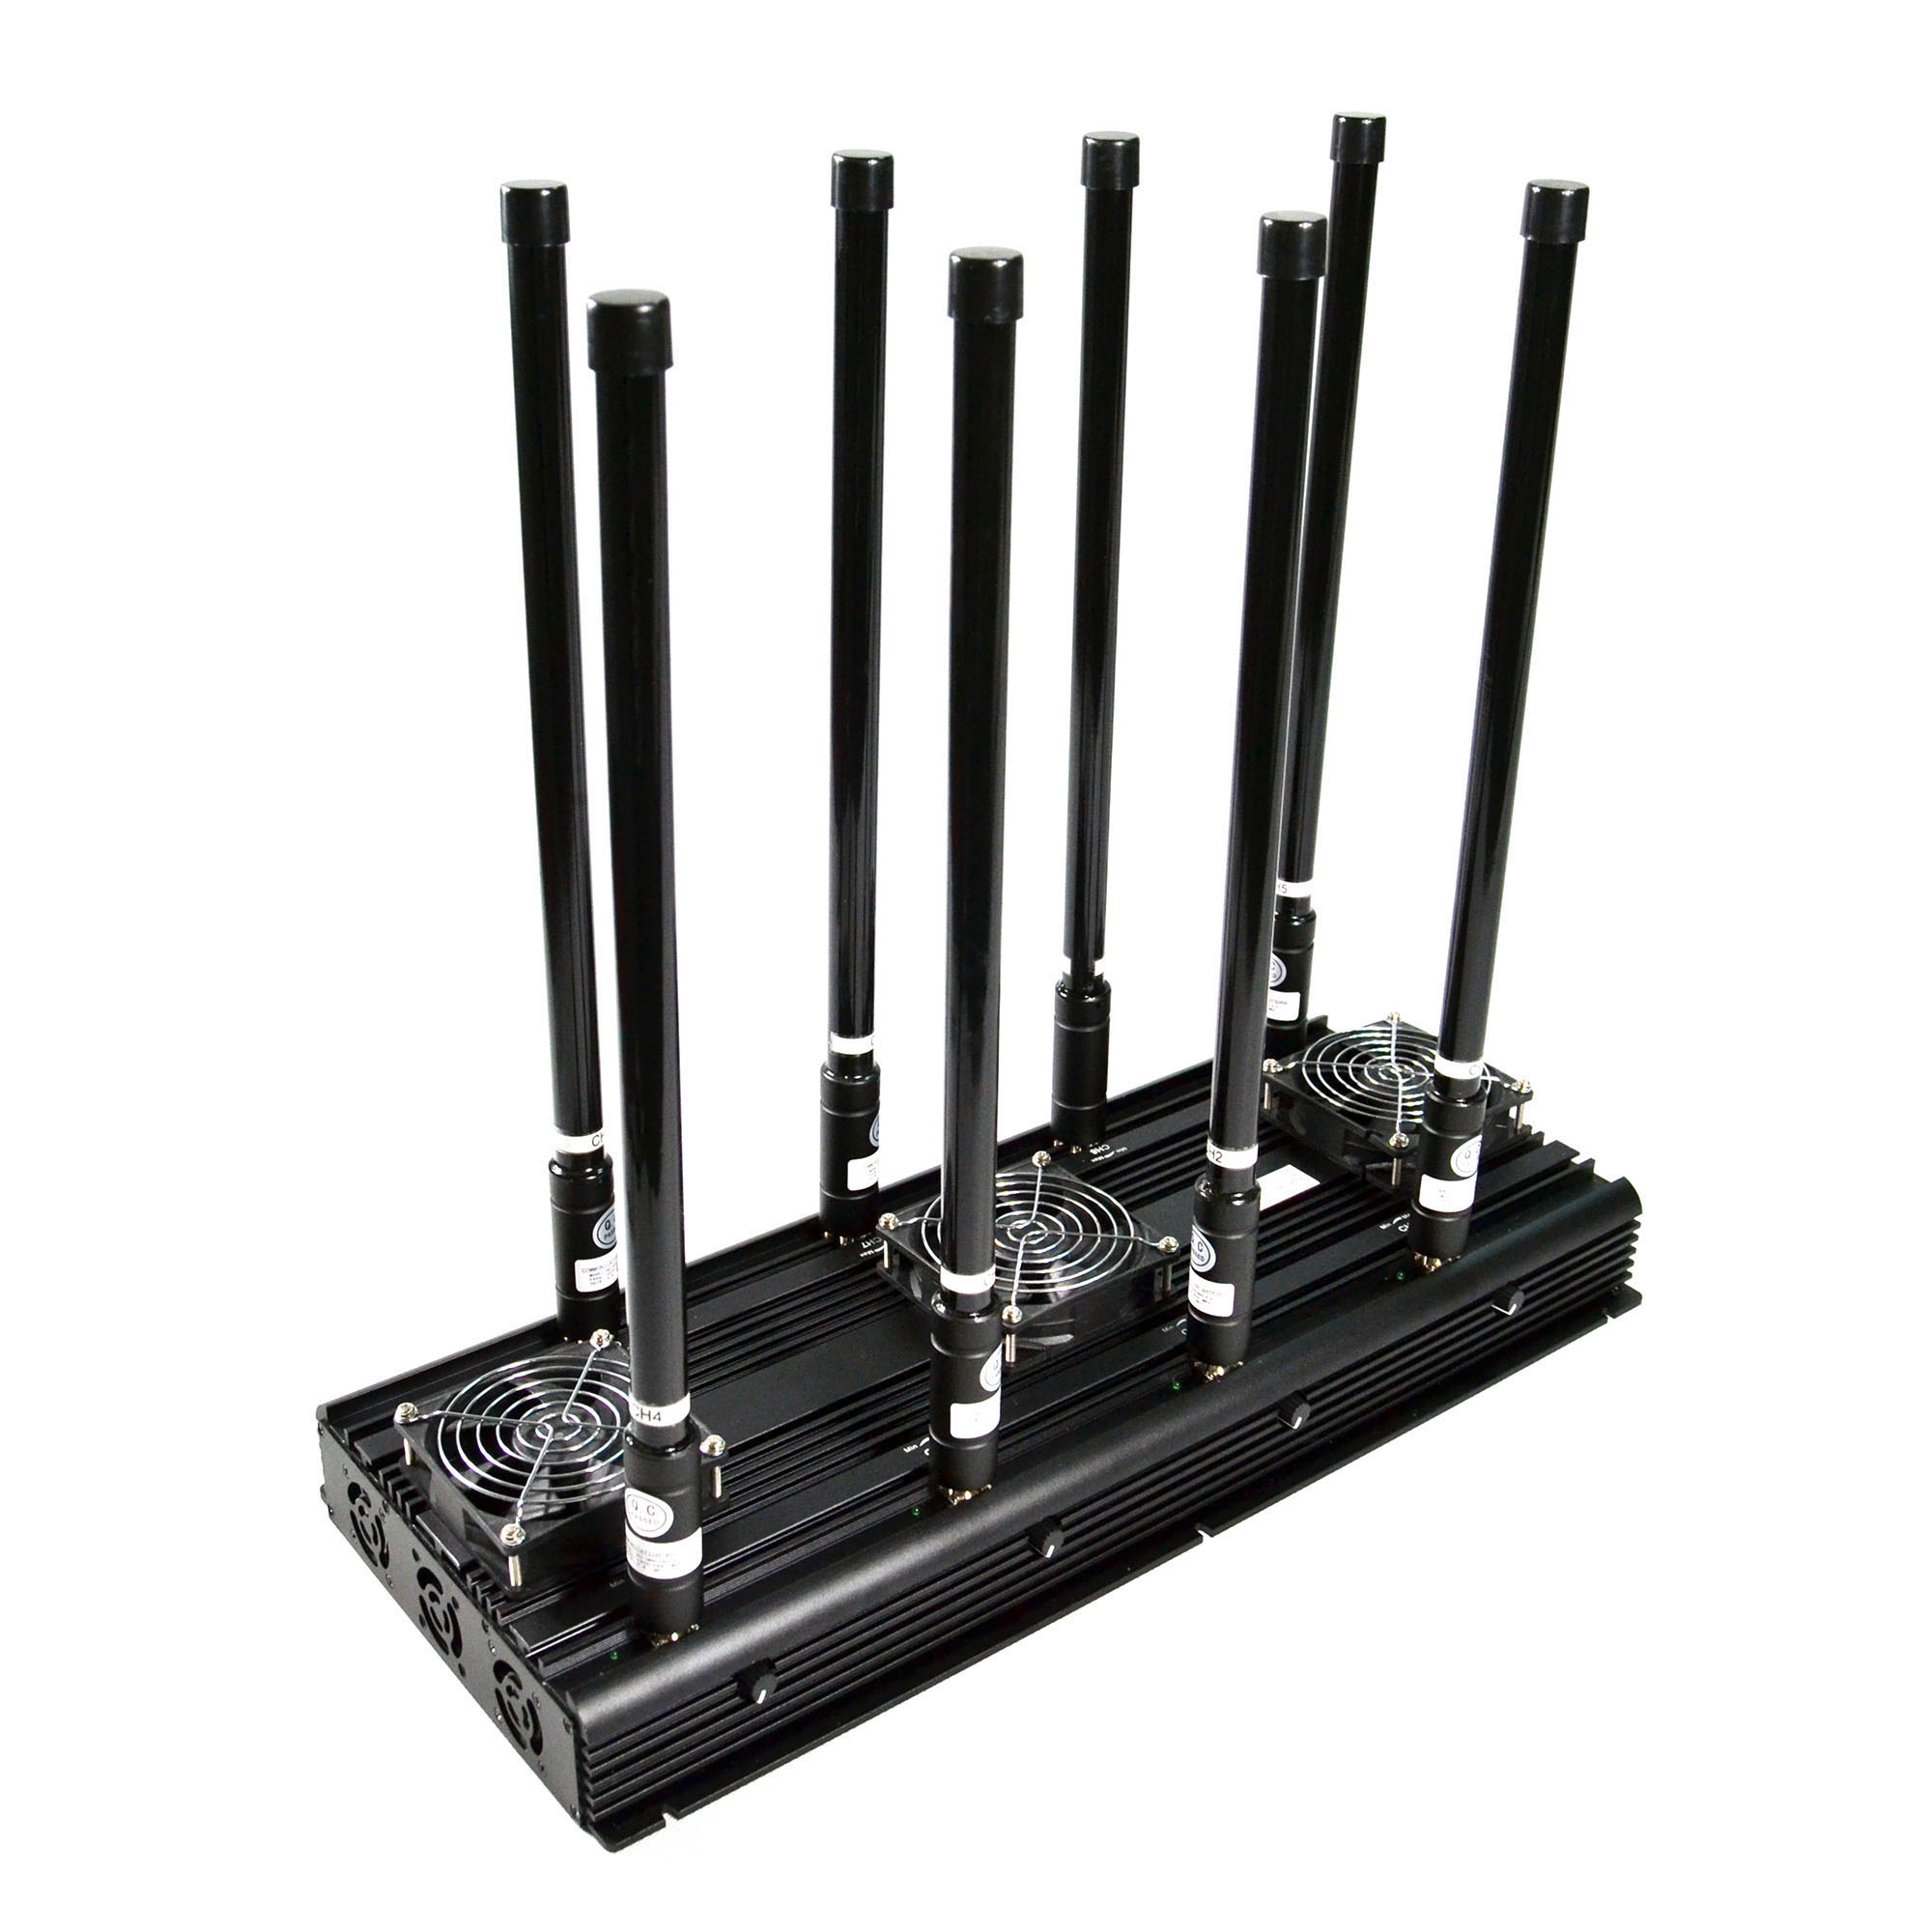 jammer kit lowes coupons , High Power 8 Bands 3G 4G WIFI Blocker Drone Signal Jammer